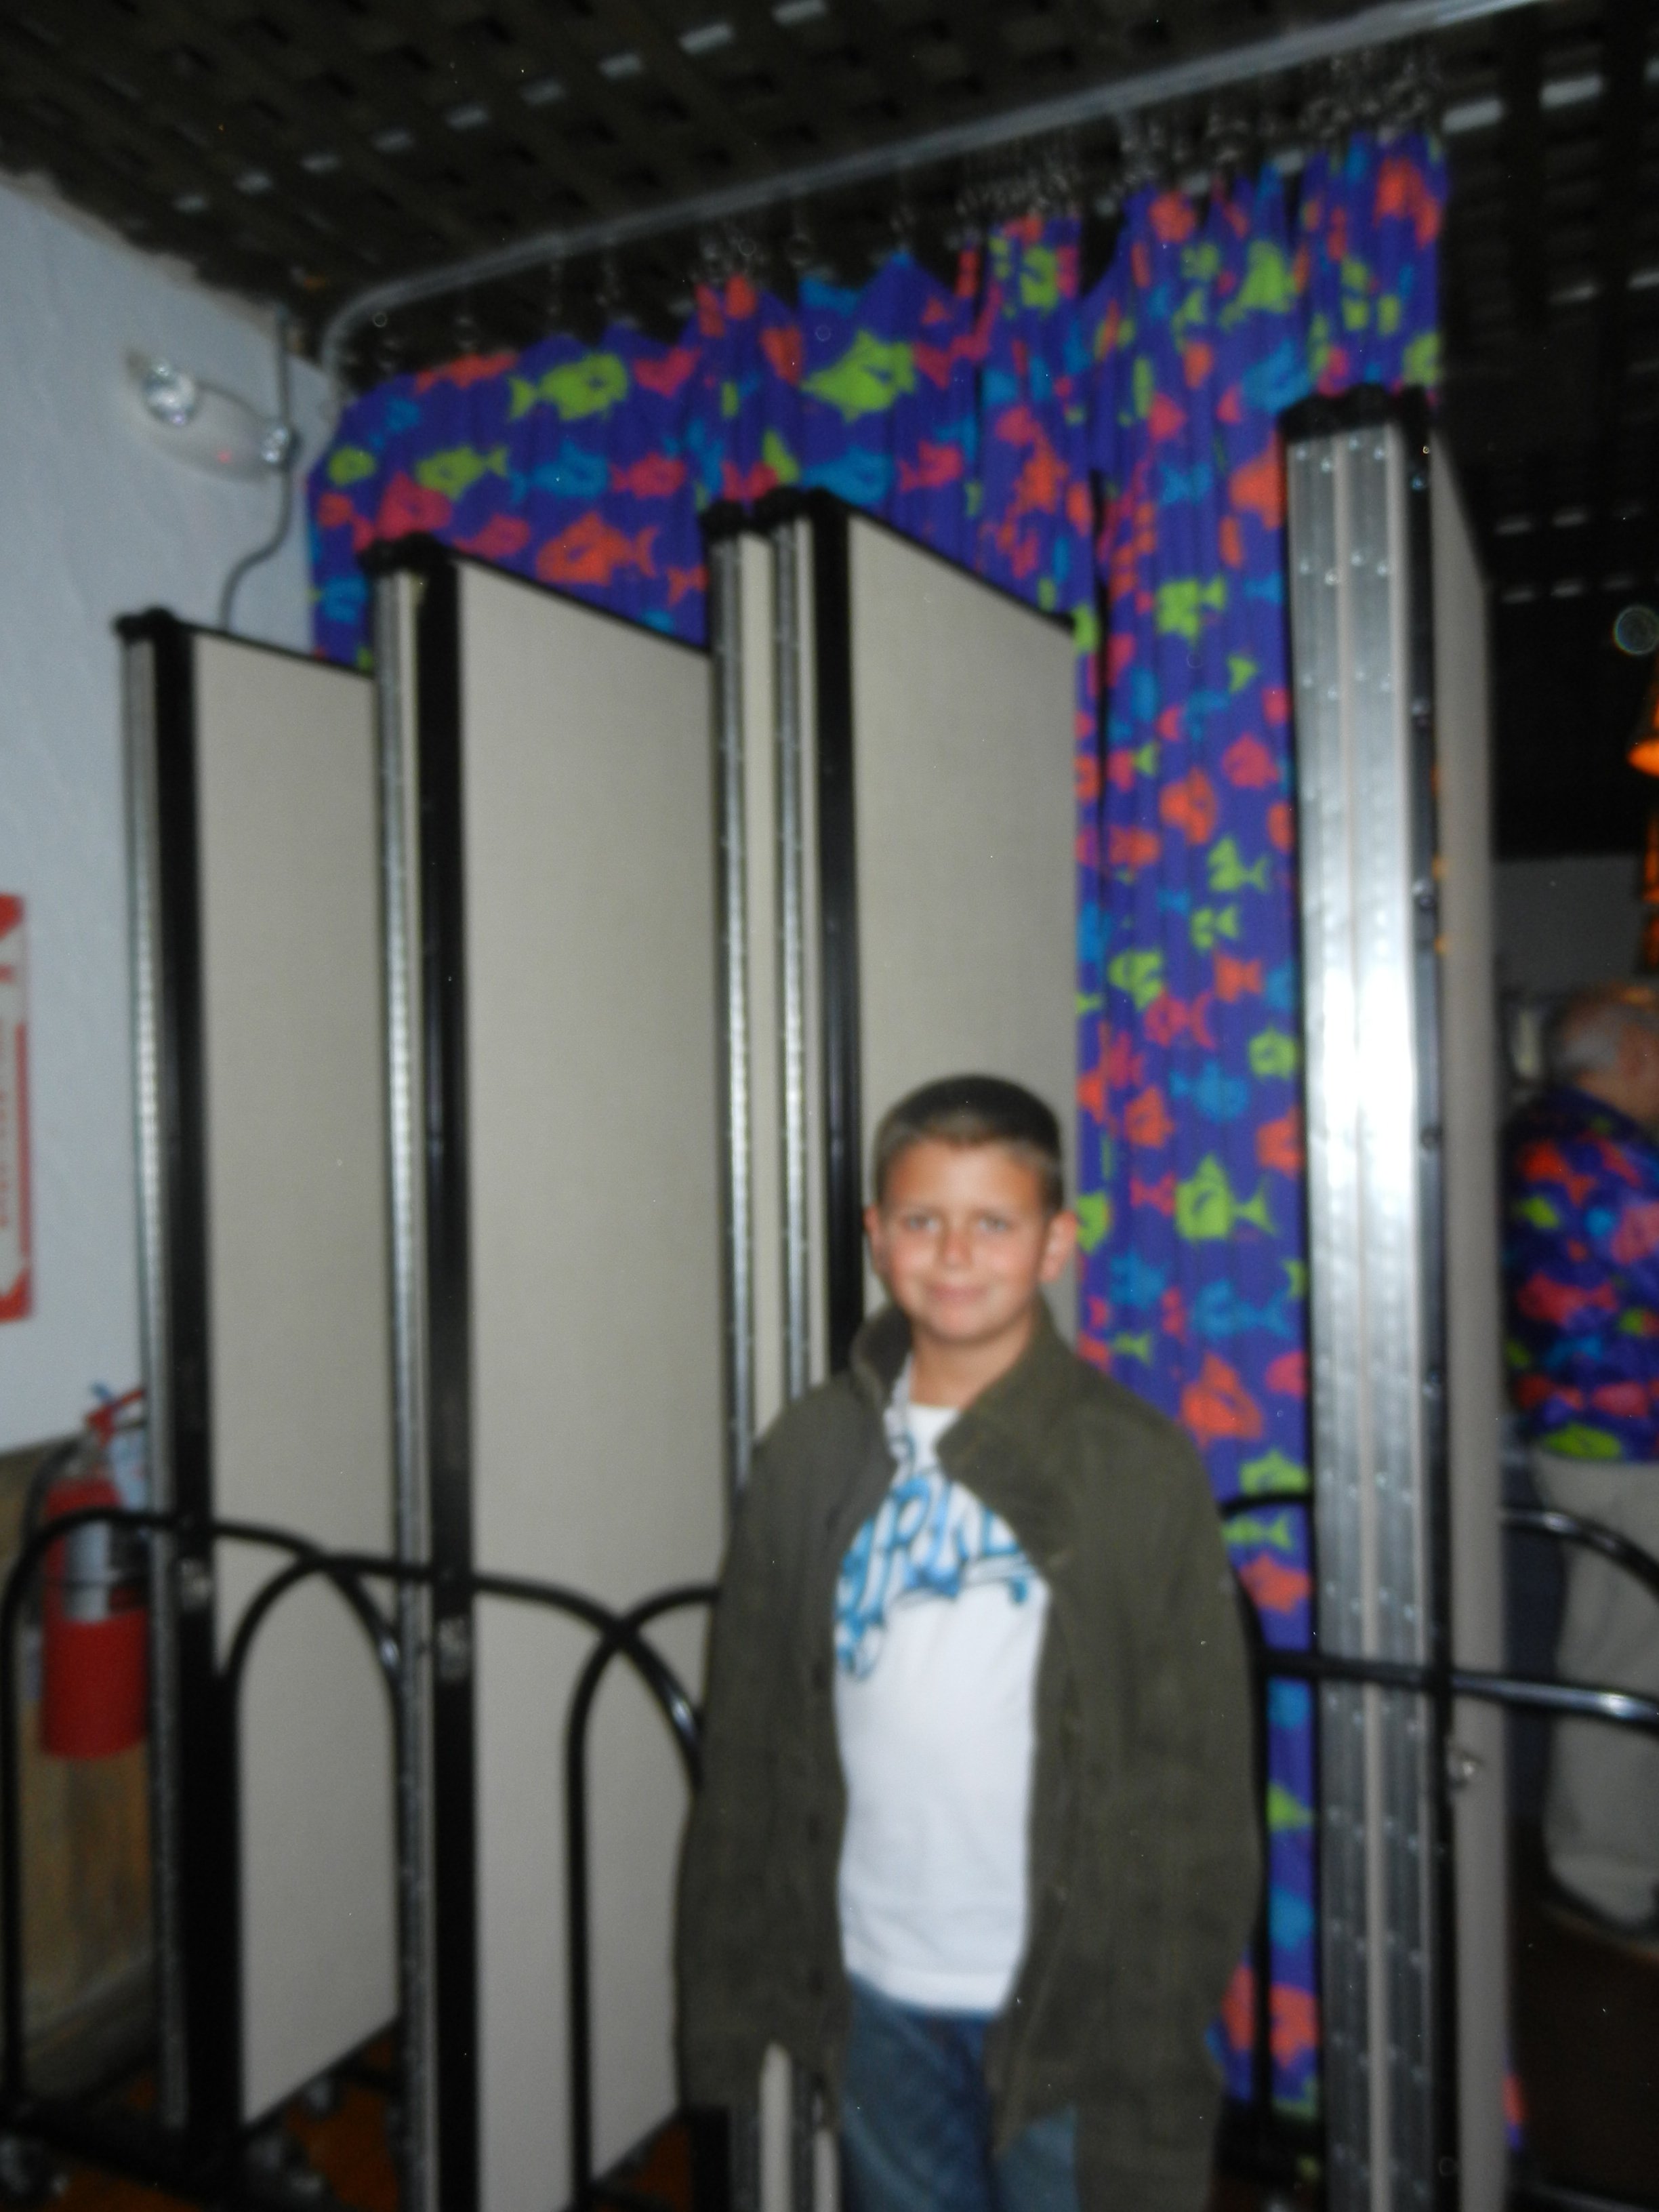 A teen boy stands in front of 4 closed room dividers